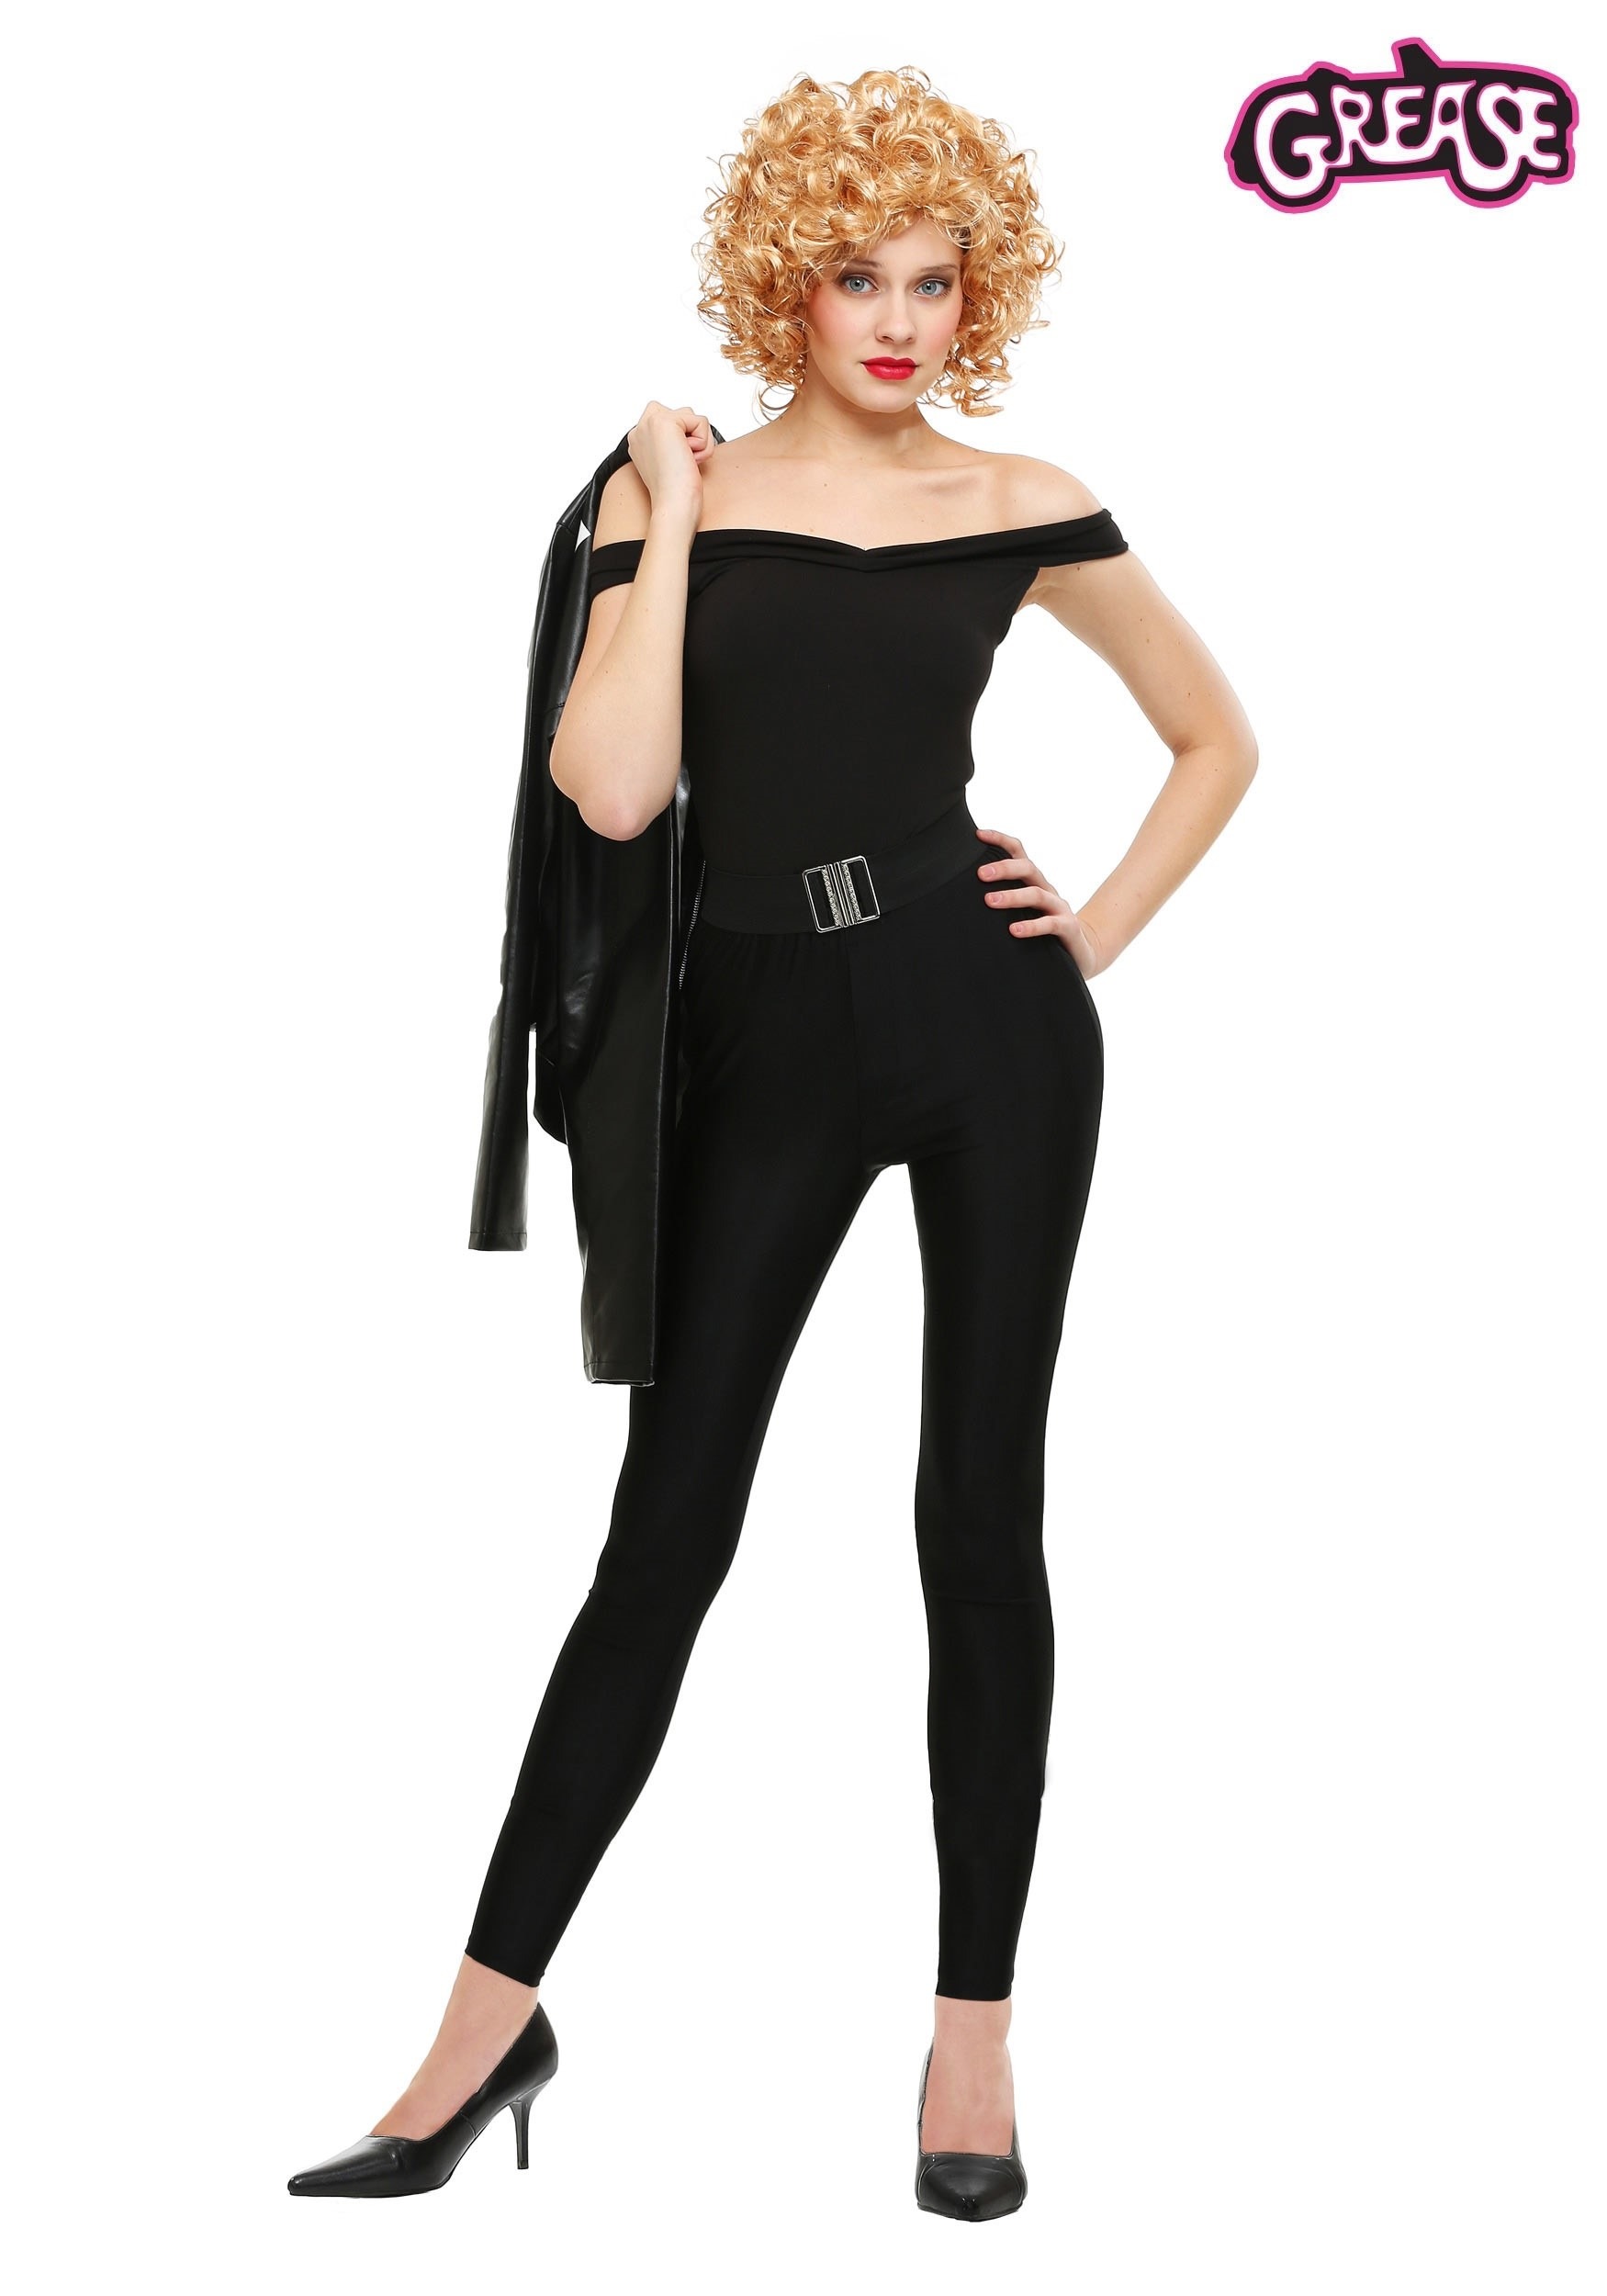 Grease Women's Plus Size Bad Sandy Costume - image 2 of 2